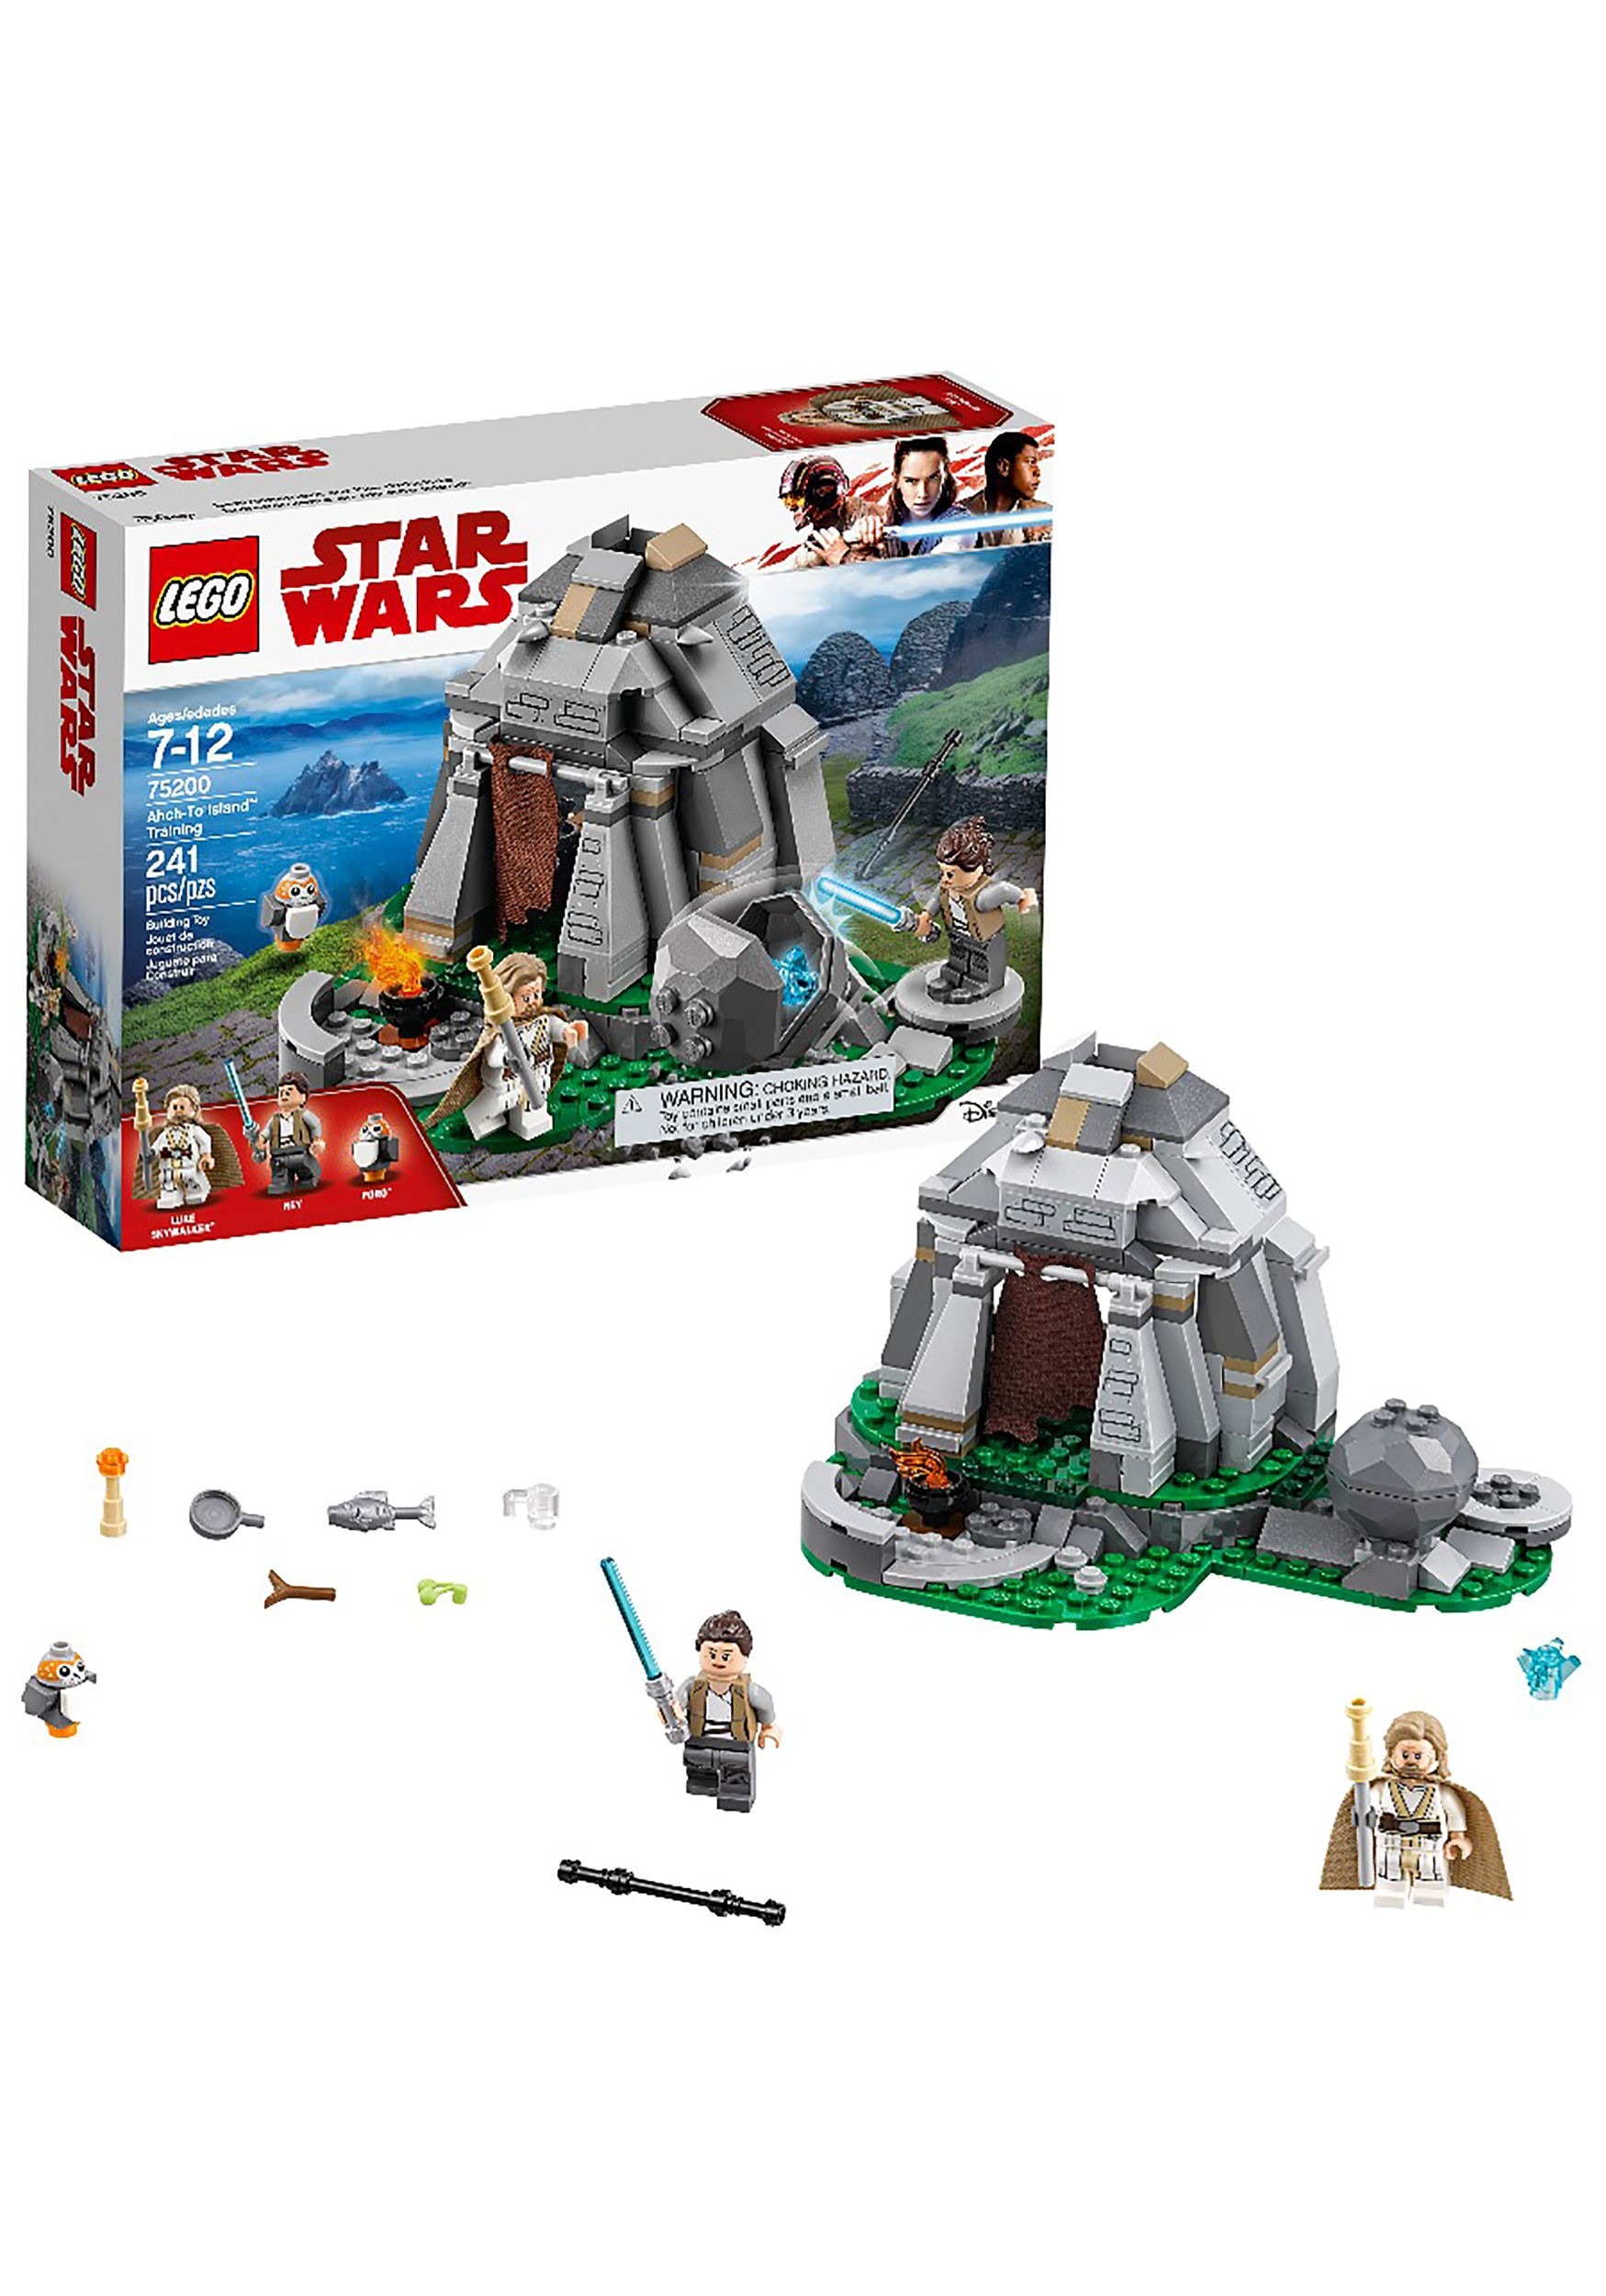 Lego Star Wars Sets Pictures